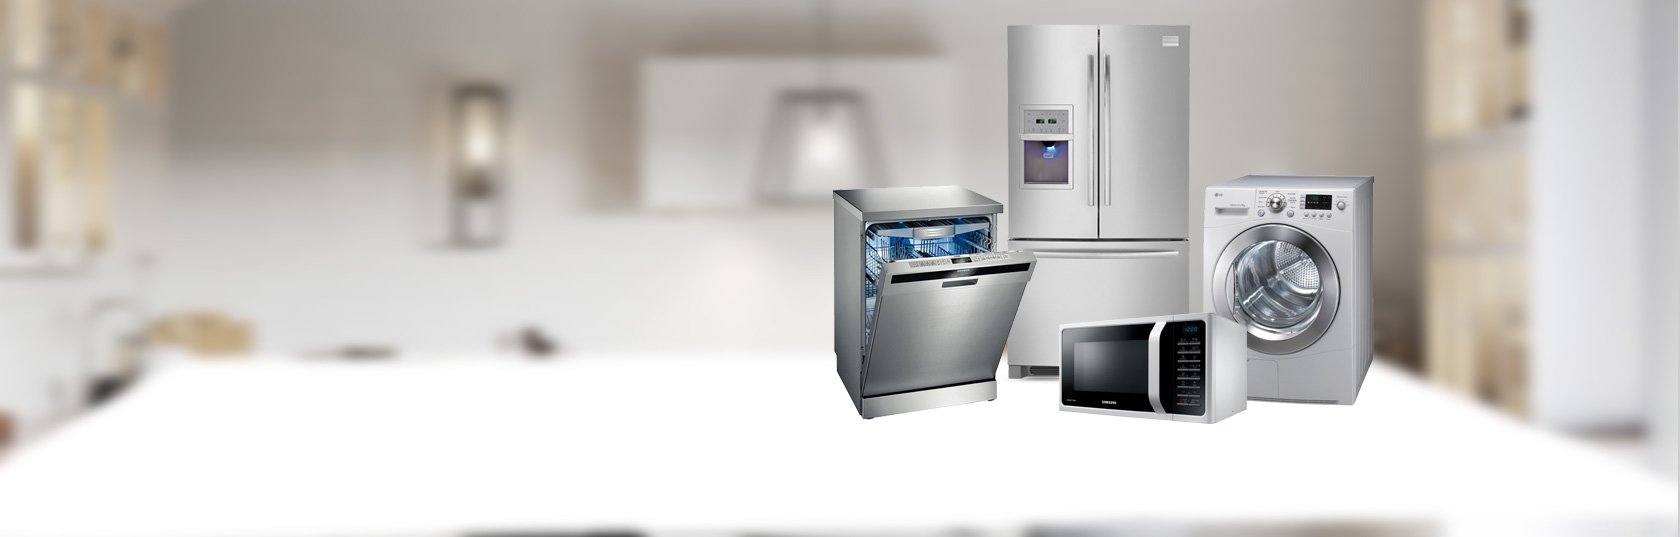 The Best Refrigerator Repair Company Dependable Refrigeration & Appliance Repair Service